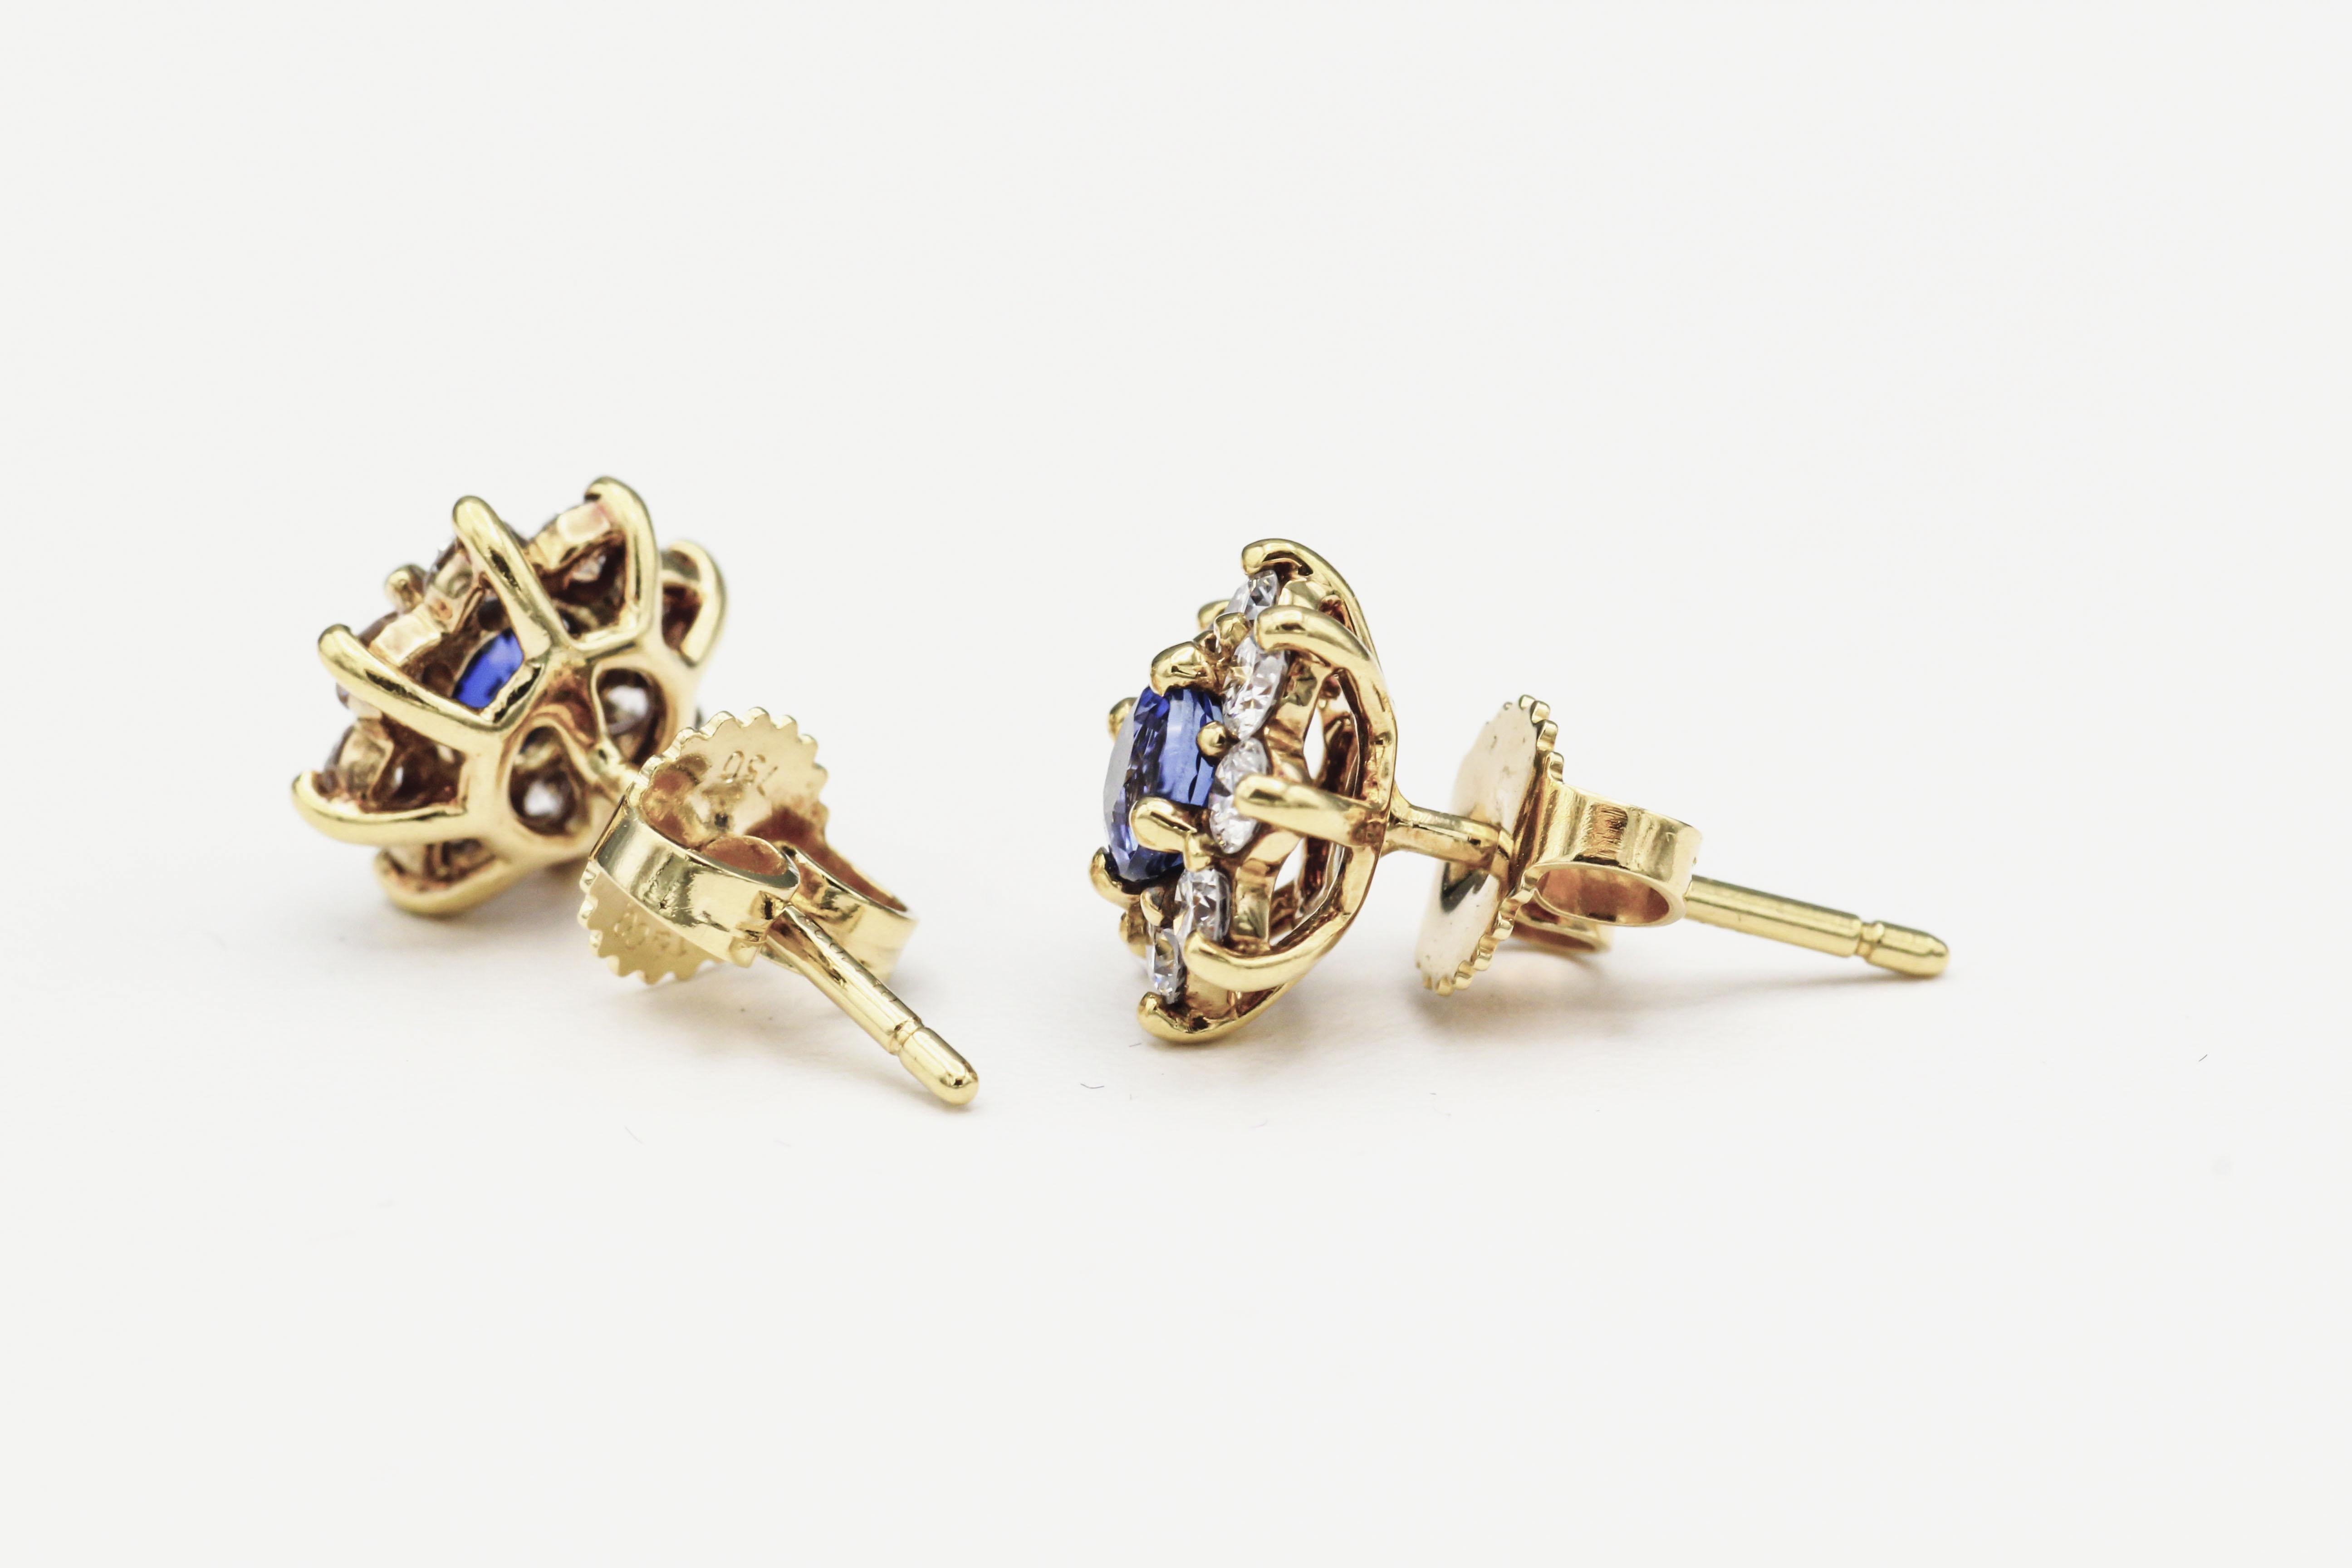 Exemplifying timeless elegance and exceptional craftsmanship, these exquisite Tiffany & Co. Sapphire and Diamond Halo Stud Earrings evoke the grace and sophistication of a bygone era. Crafted in the opulence of 18k yellow gold, these earrings are a